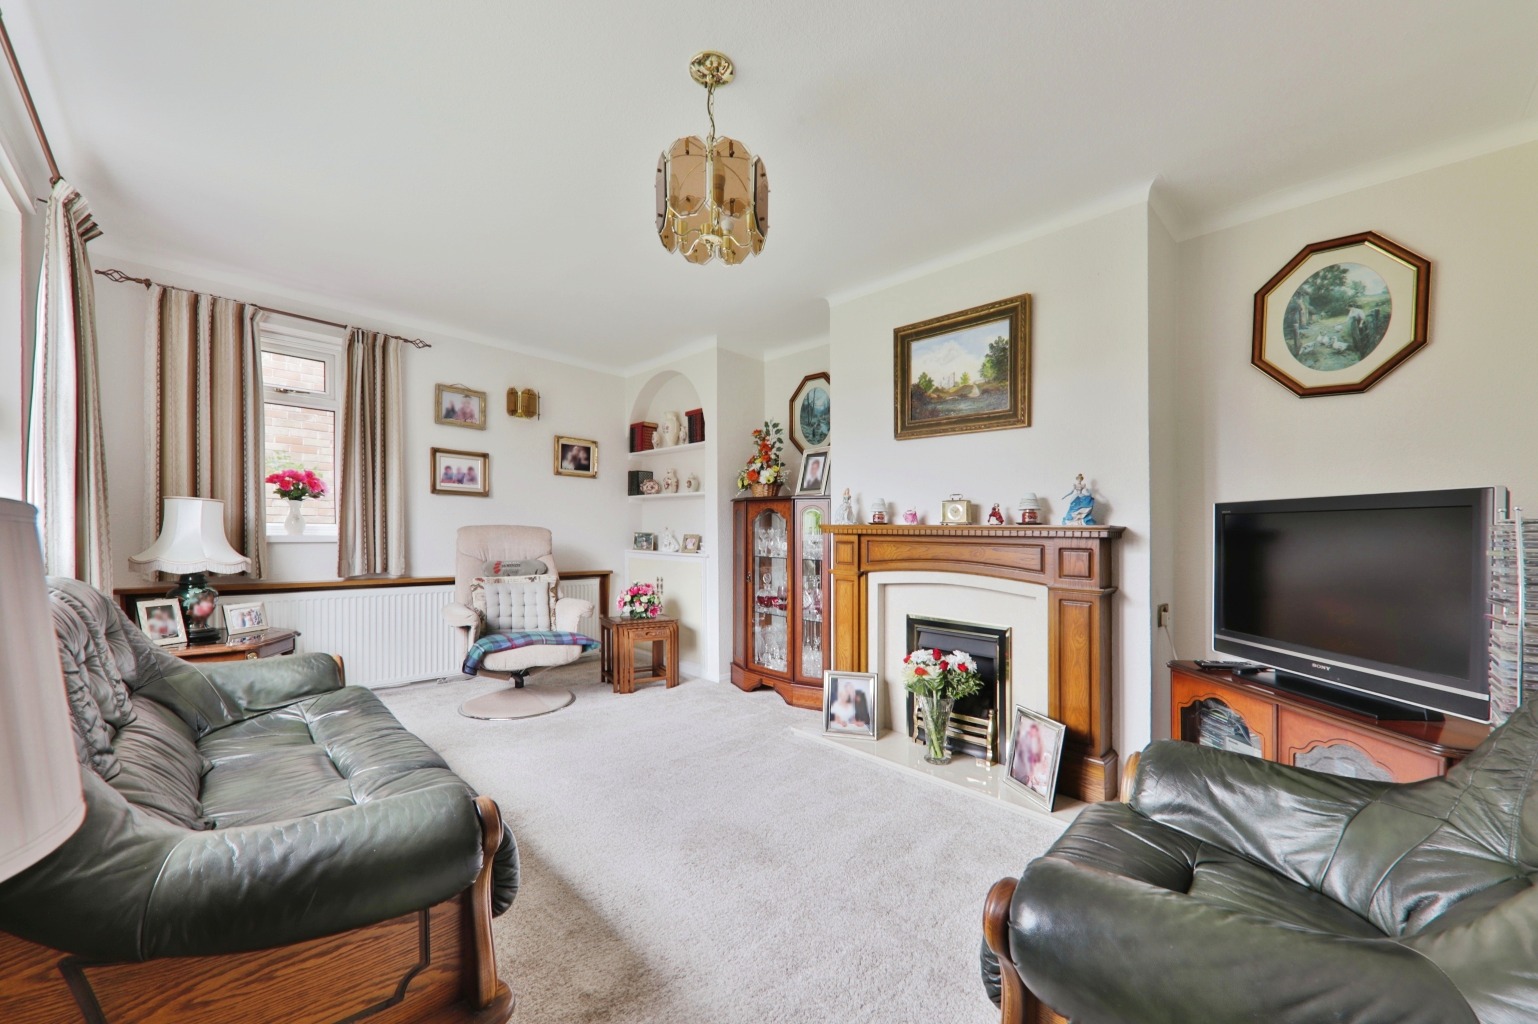 3 bed detached house for sale in West Acridge, Barton upon Humber  - Property Image 2